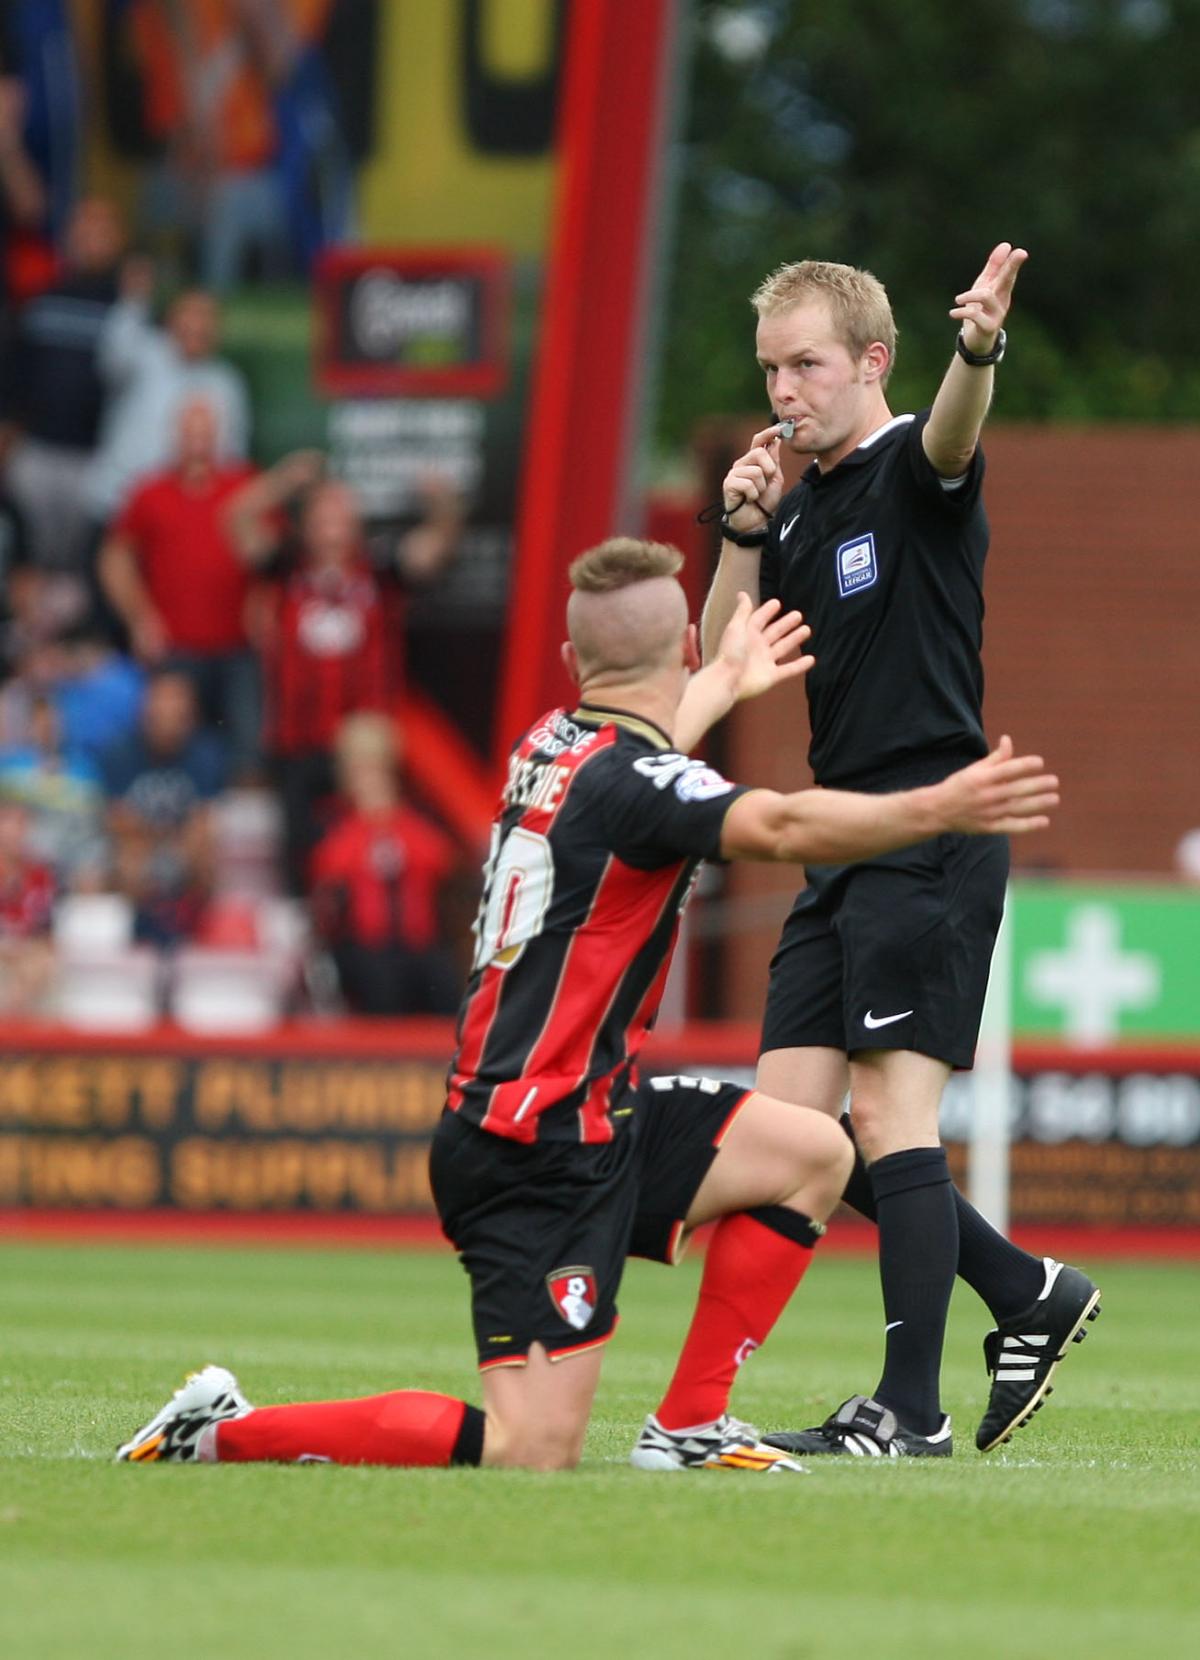 All our pictures from AFC Bournemouth v Brentford at Dean Court on Saturday, August 16